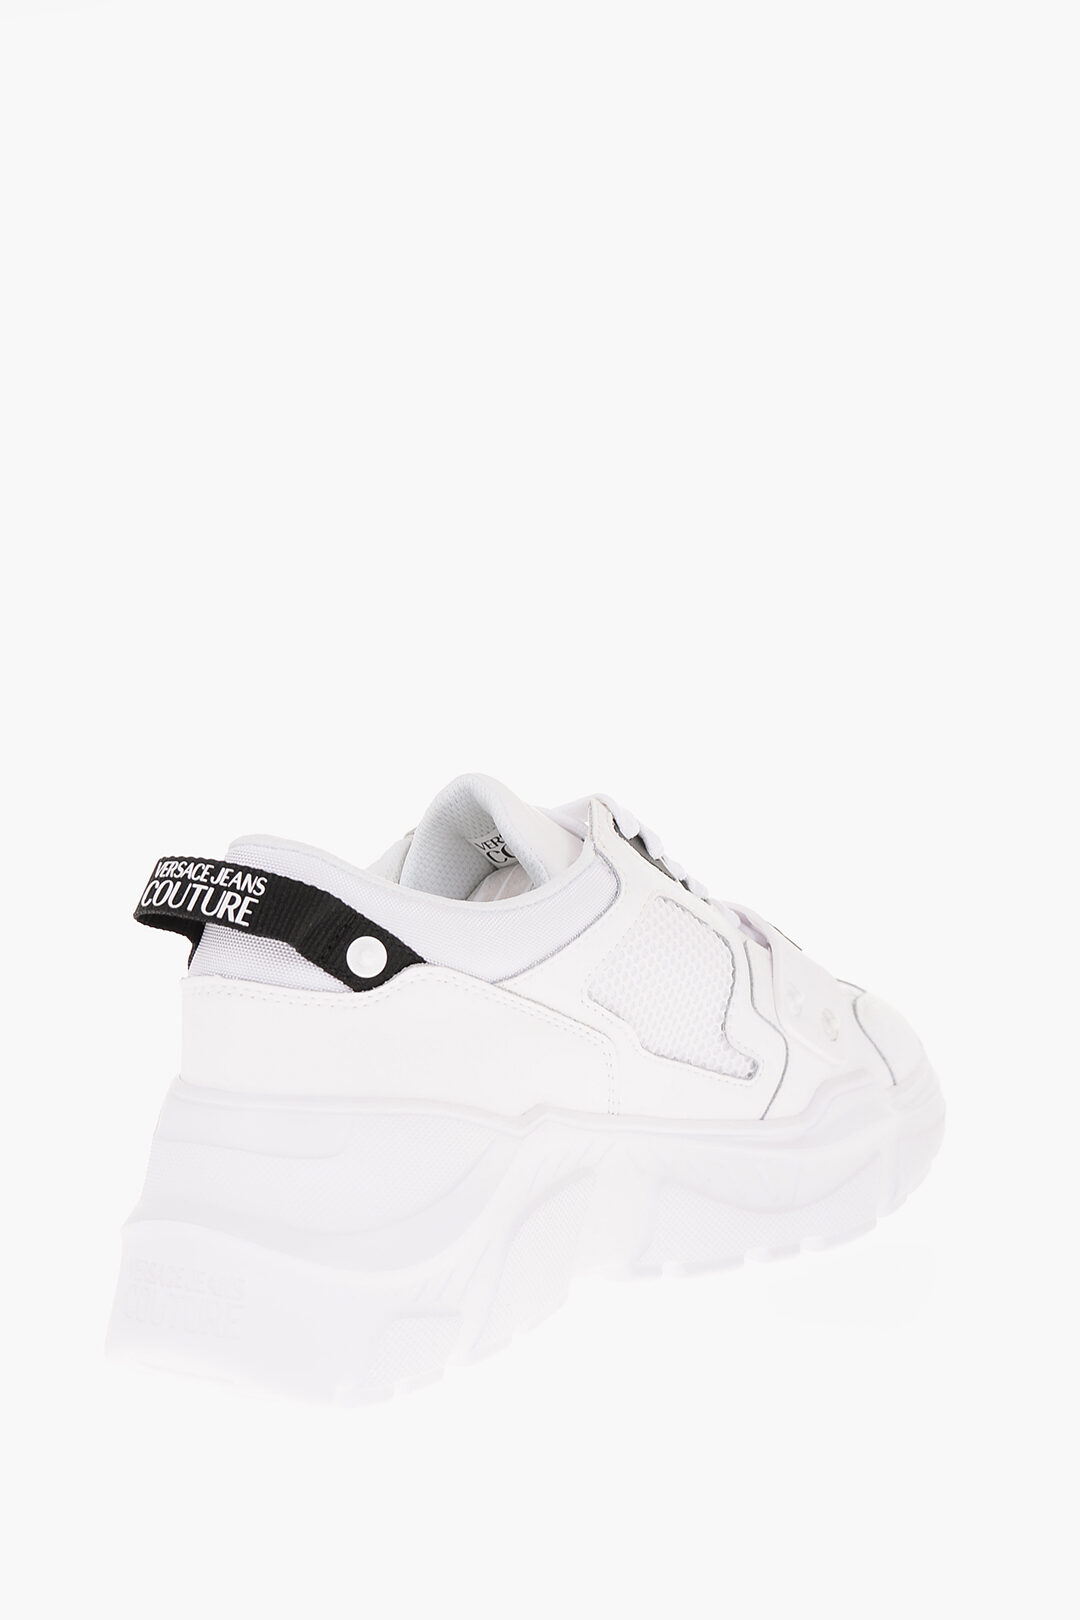 Versace Jeans Couture White Brooklyn V-Emblem Sneakers - ShopStyle